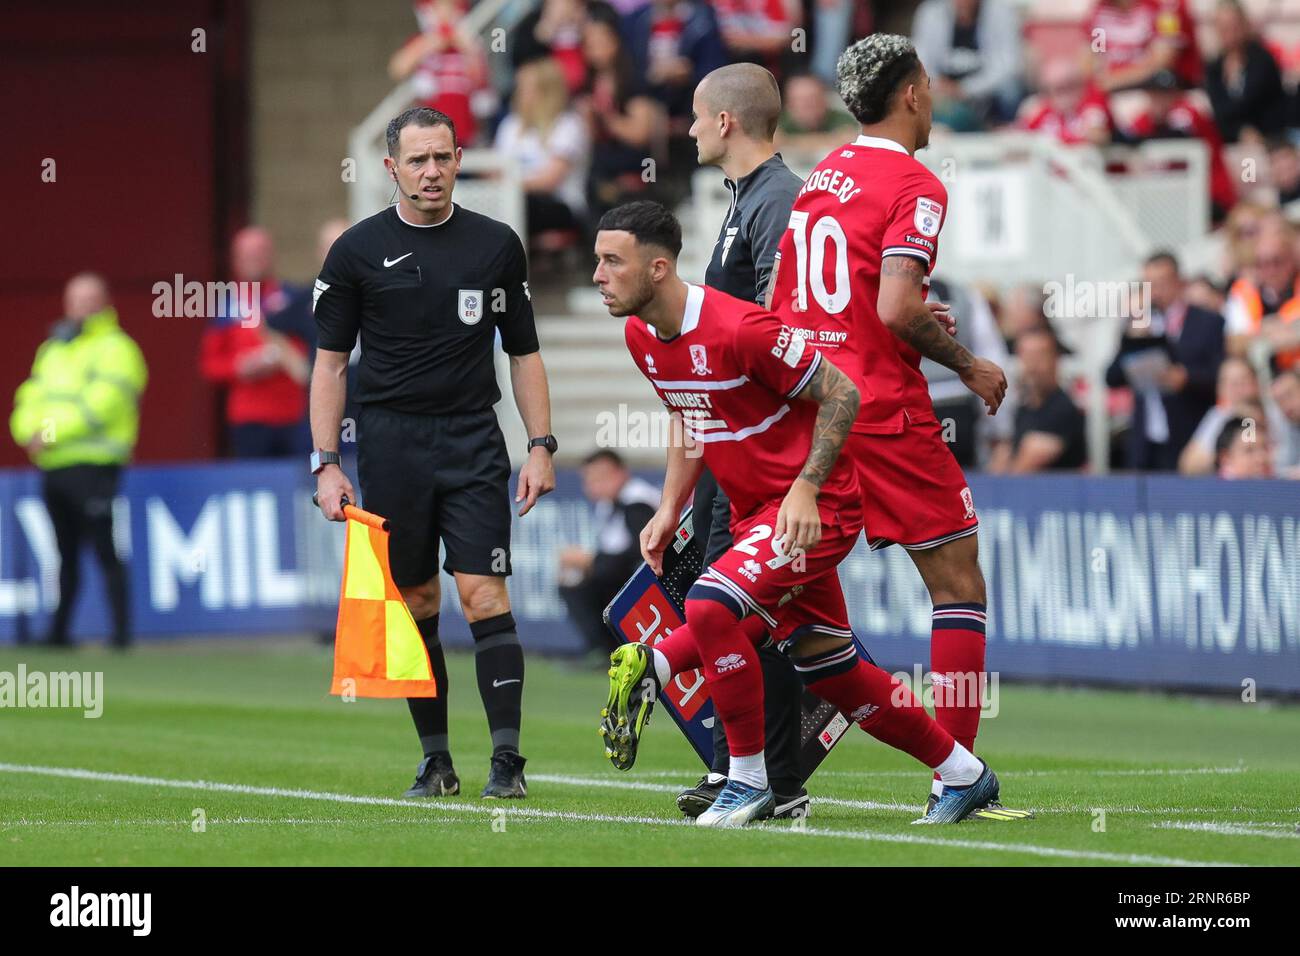 Sam Greenwood #29 of Middlesbrough comes on in the second half for his  debut game during the Sky Bet Championship match Middlesbrough vs Queens  Park Rangers at Riverside Stadium, Middlesbrough, United Kingdom,